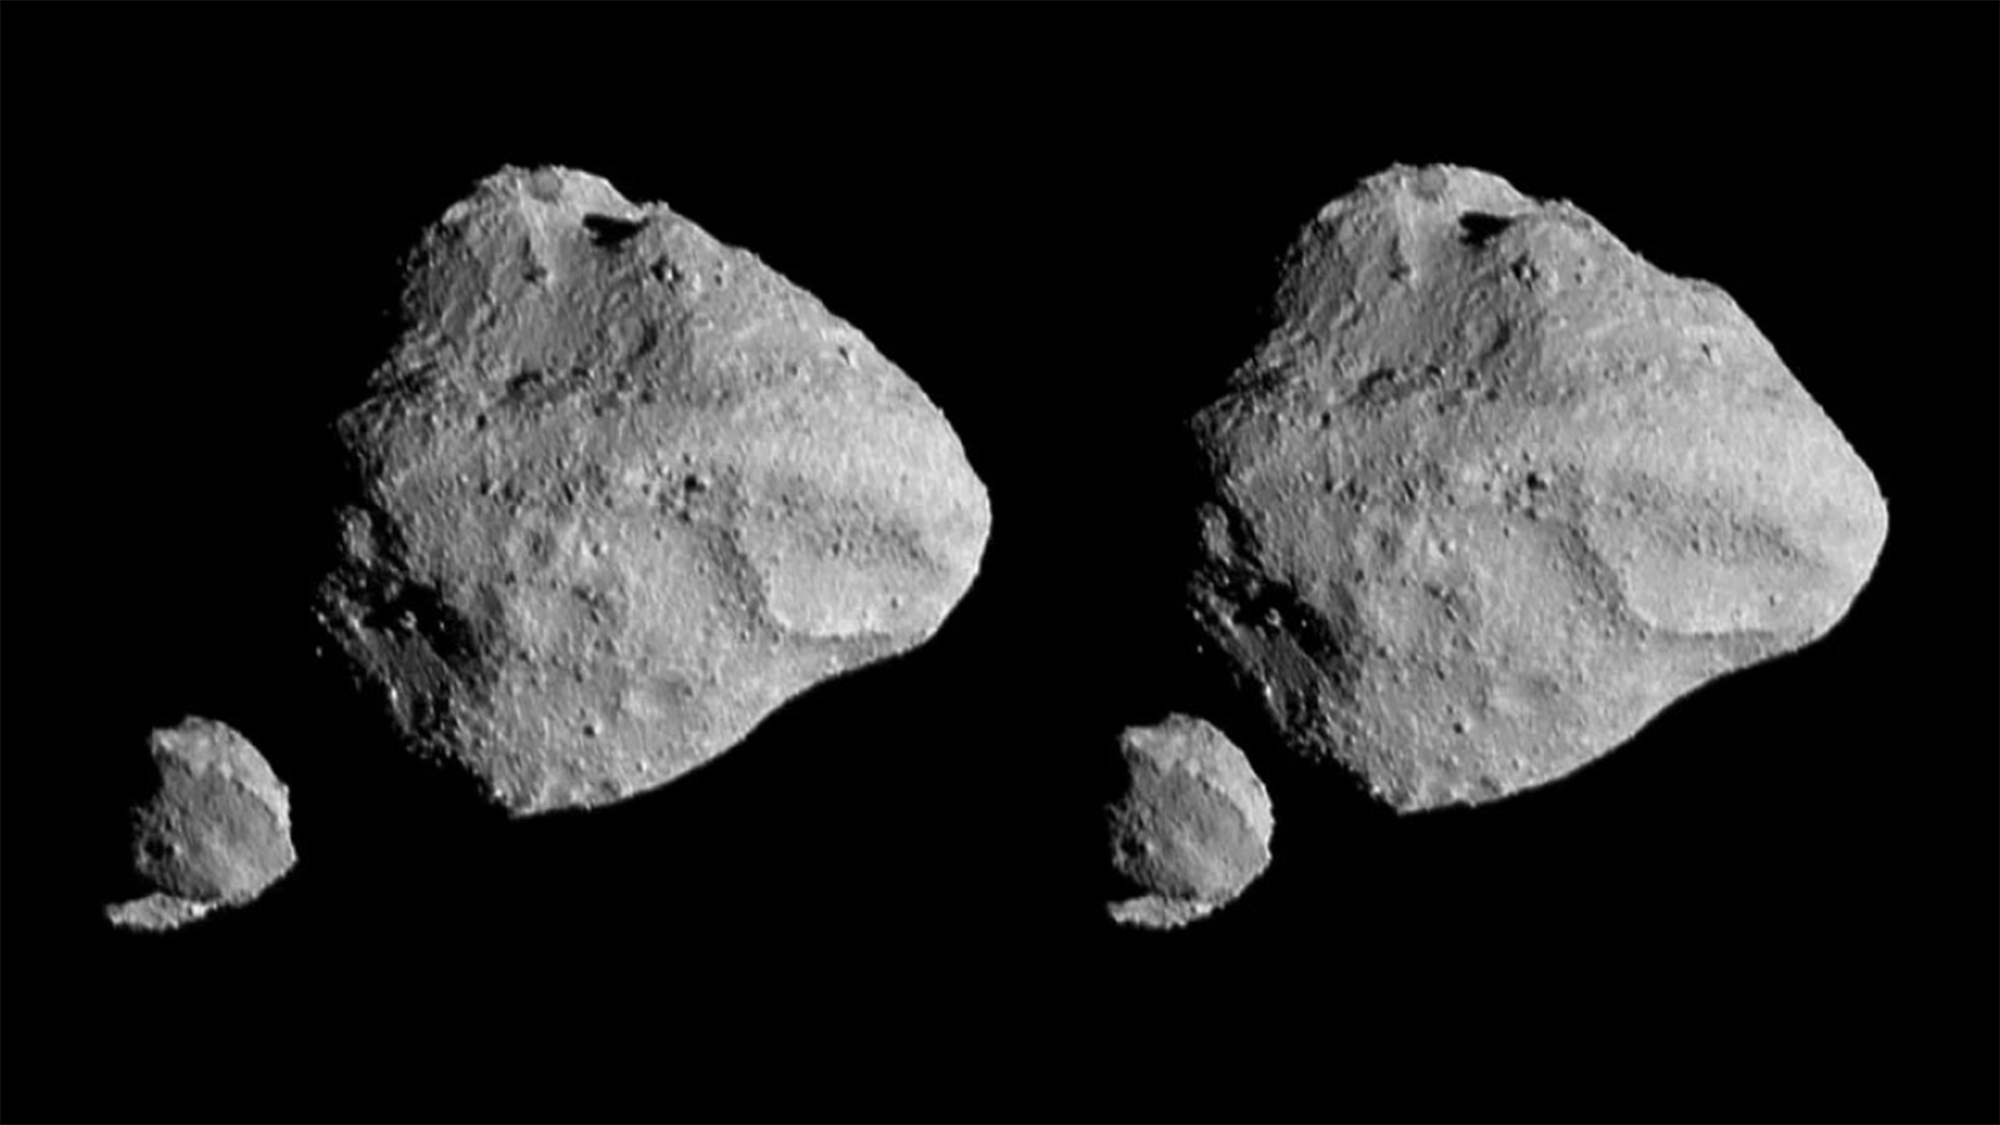 'lucy’s baby’ asteroid is only about 2 to 3 million years old